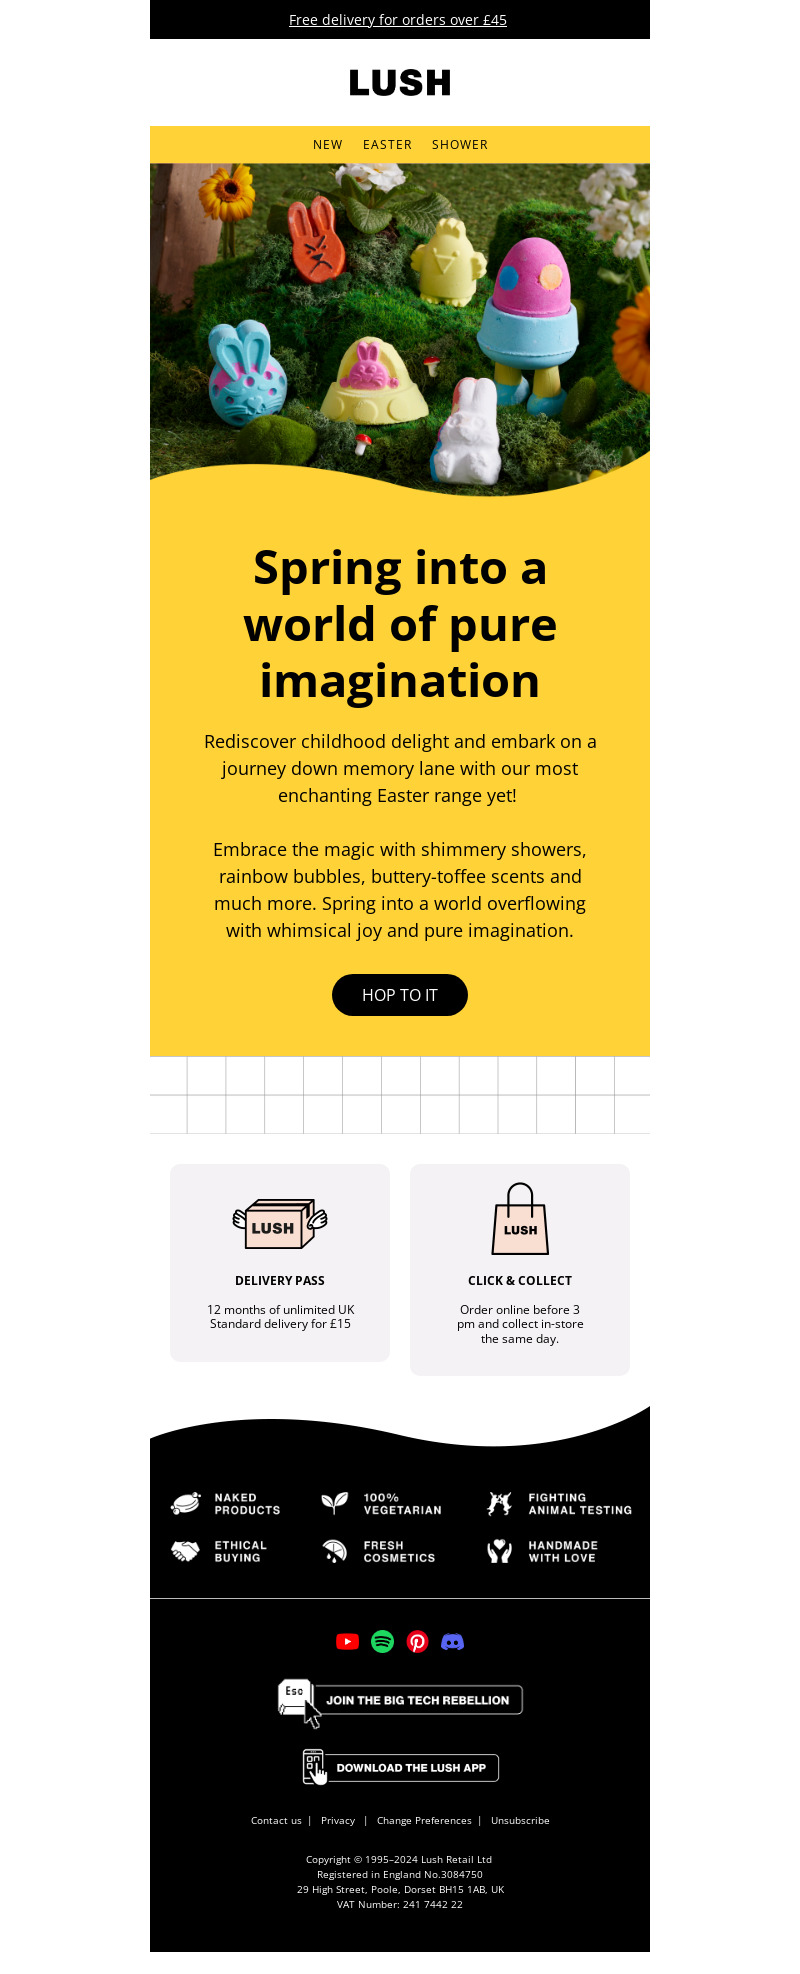 LUSH Cosmetics' email campaign with creative copywriting.